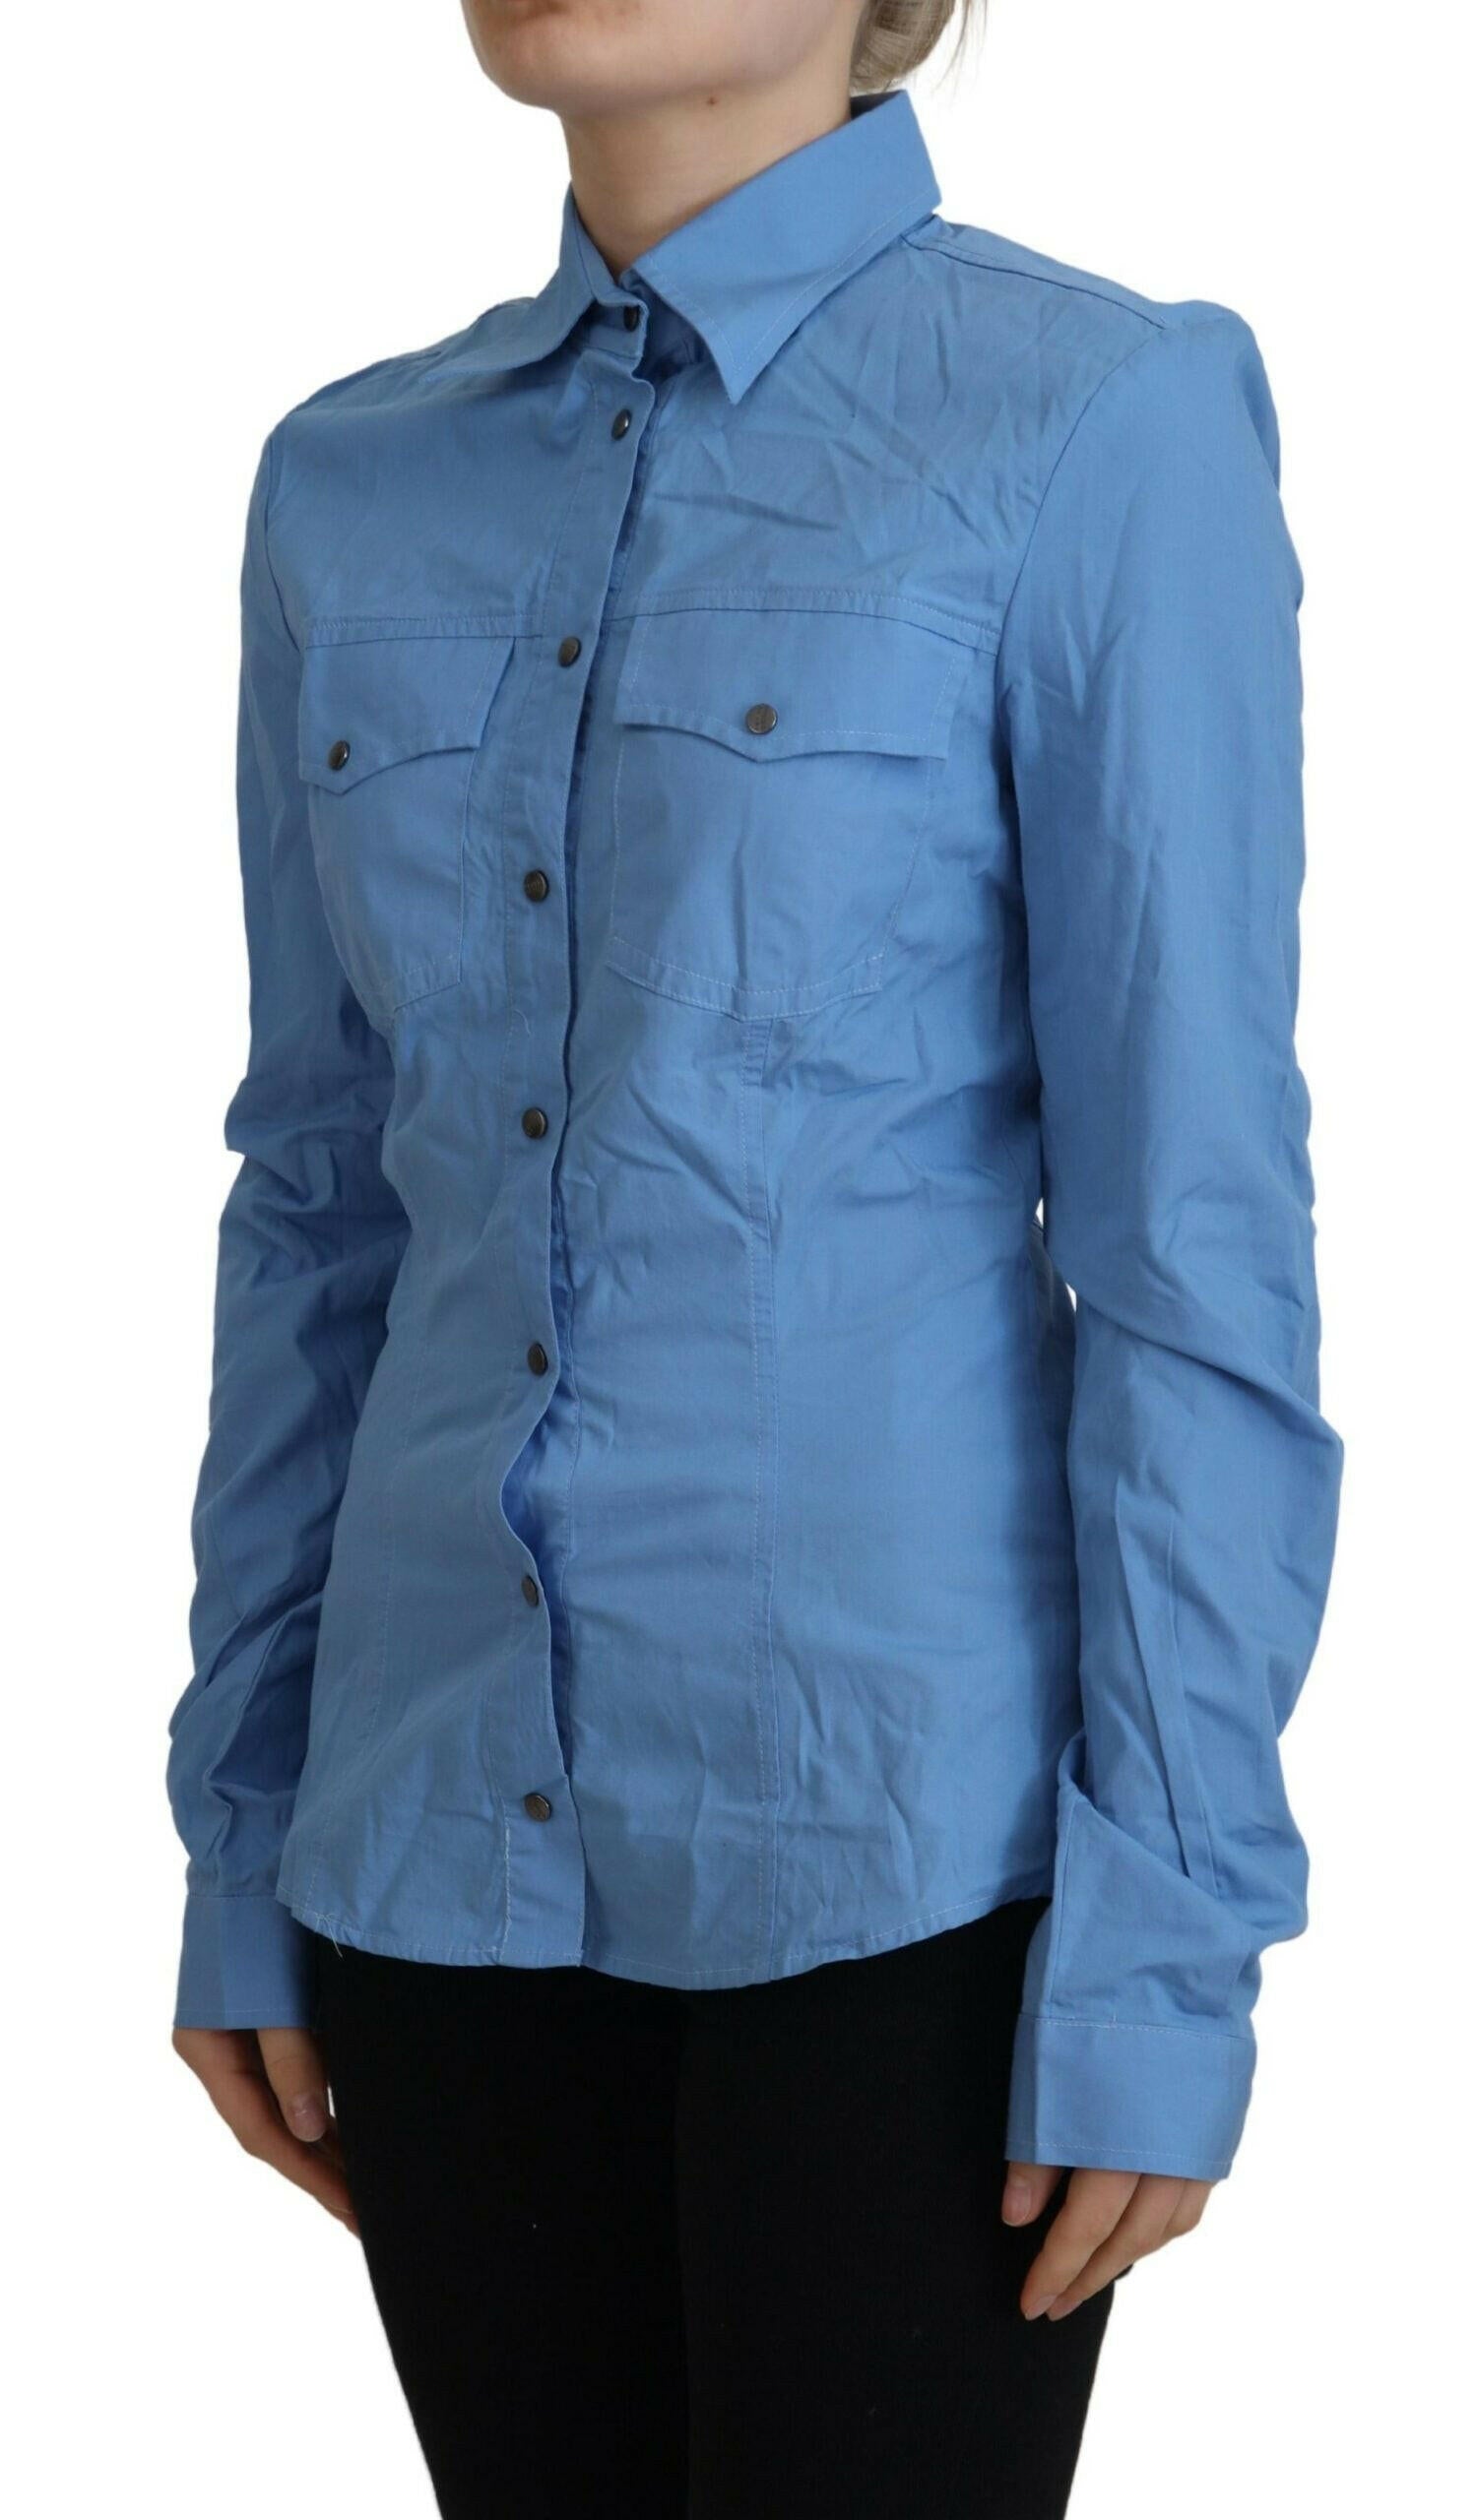 Ferre Blue Cotton Long Sleeves Collared Button Down Top - GENUINE AUTHENTIC BRAND LLC  